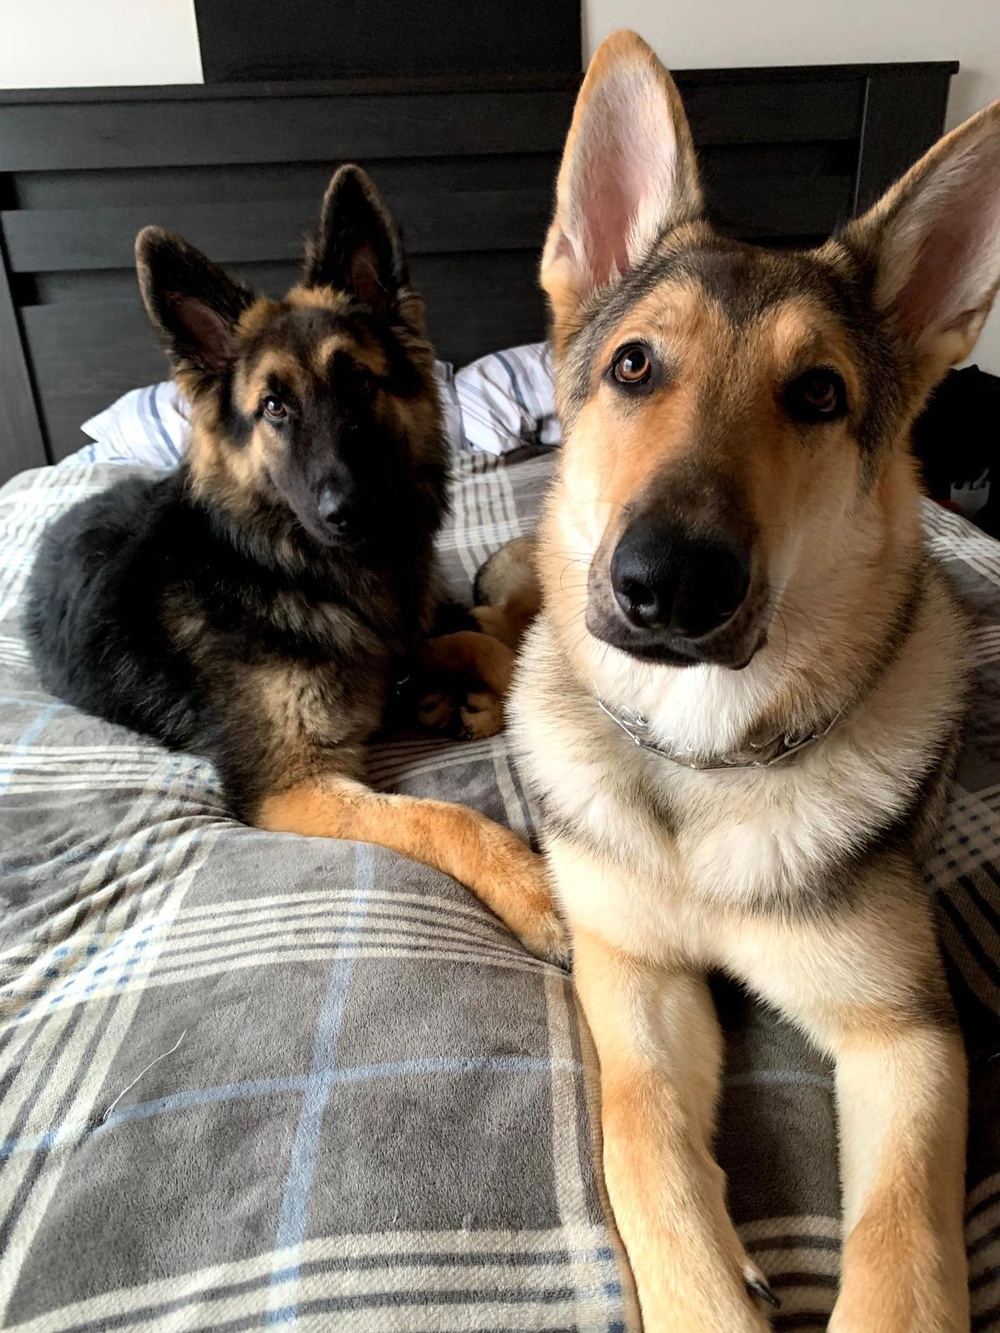 Bryant's German shepherds, Waylon and Ziggy, are currently living with Bryant’s parents and grandmother in Florida while Bryant and her husband serve in the U.S. Army and Air Force in Germany.